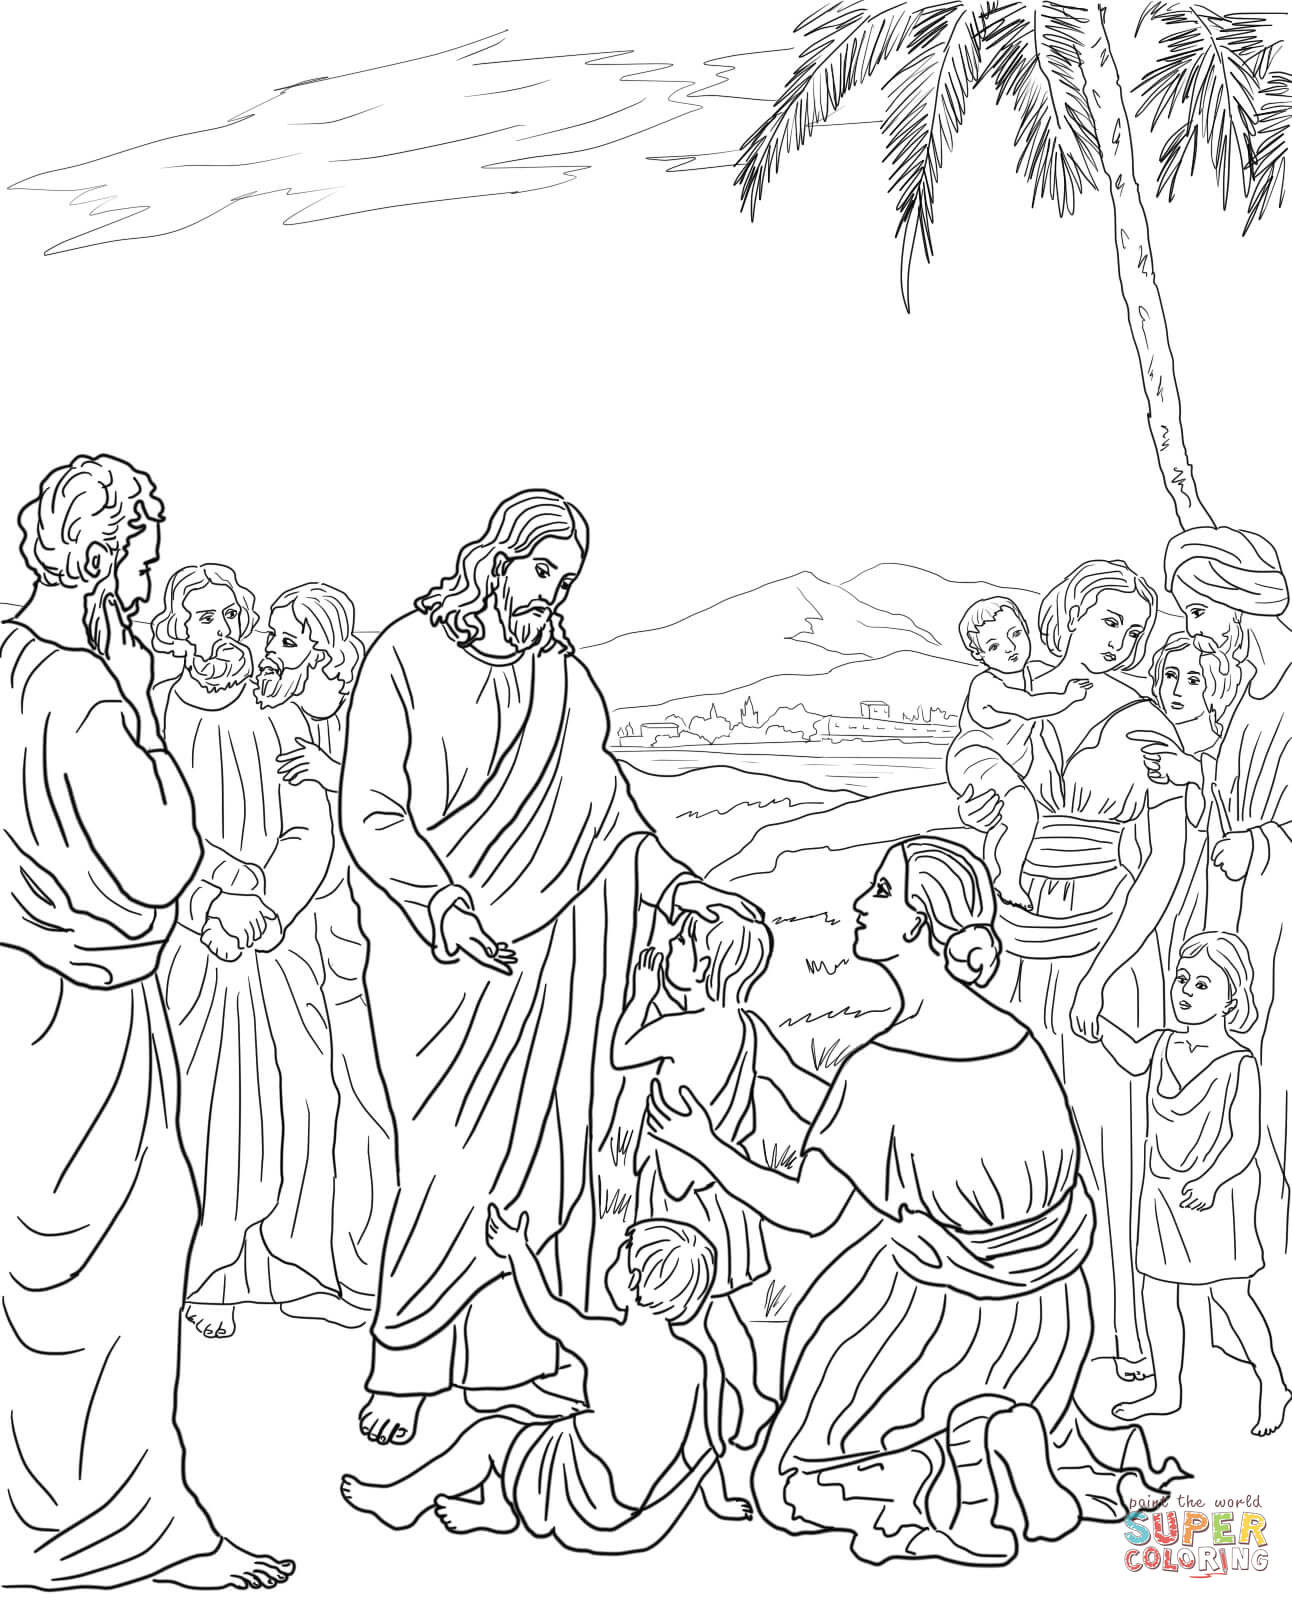 Jesus And The Children Coloring Page
 Jesus With Little Children Coloring Page Coloring Home